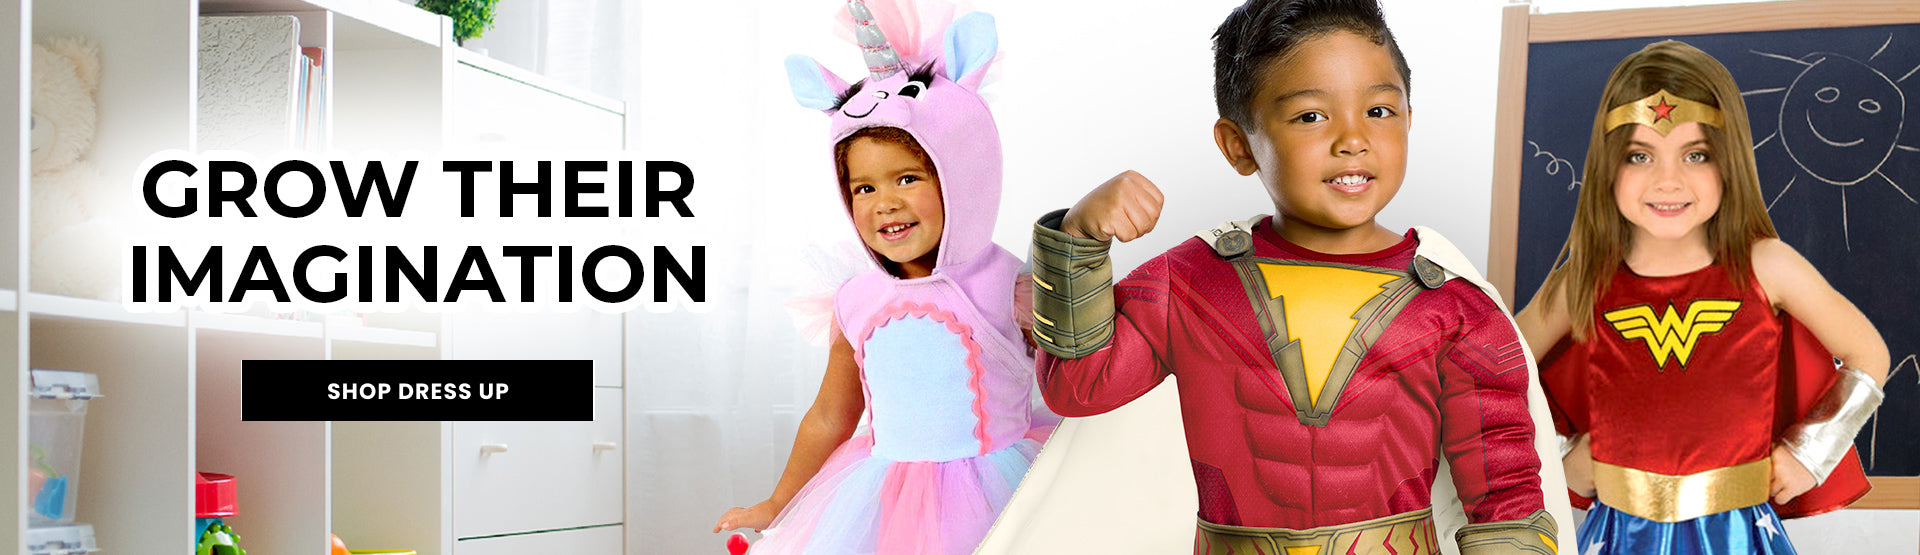 Grow your baby or toddler's imagination with a Kid's Costume - Shop Kid's Dress Up Costumes at Costumes.com